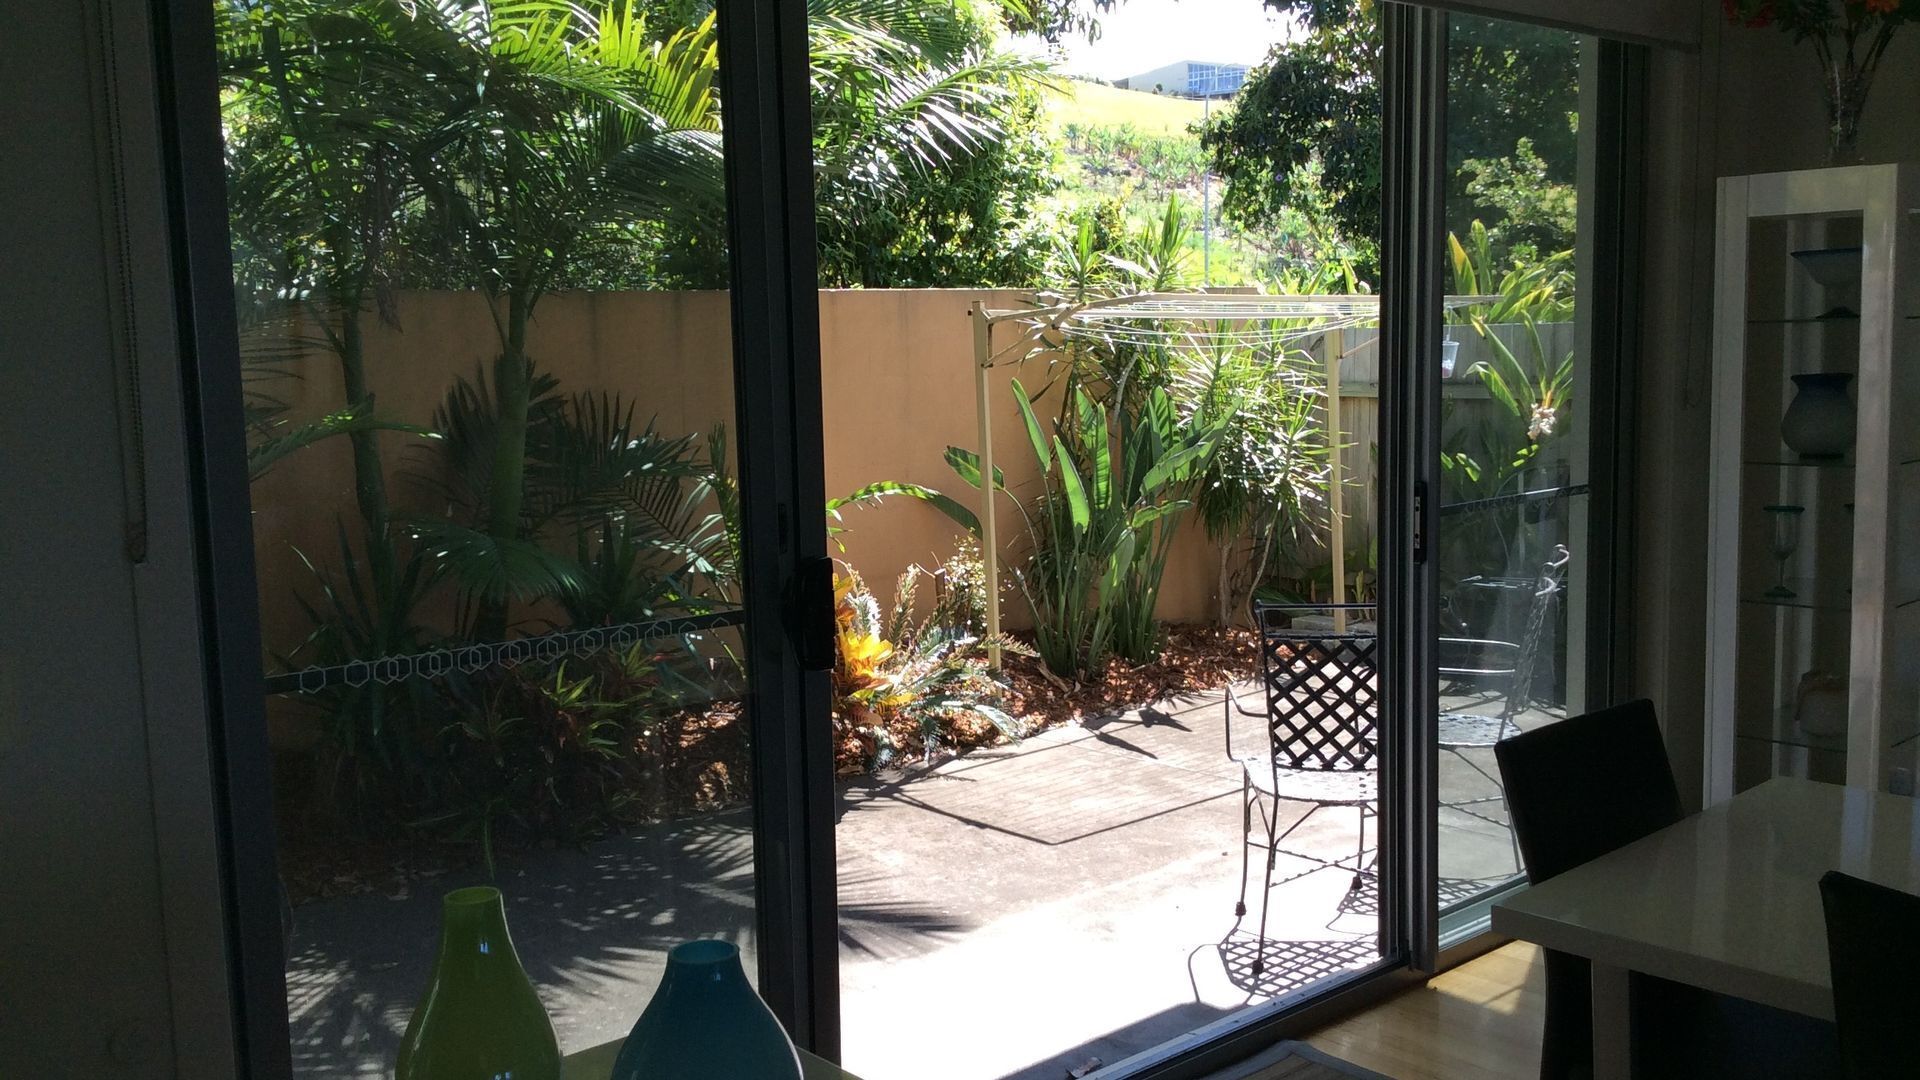 Family holiday right near Diggers Beach and shops. Light filled spacious home.